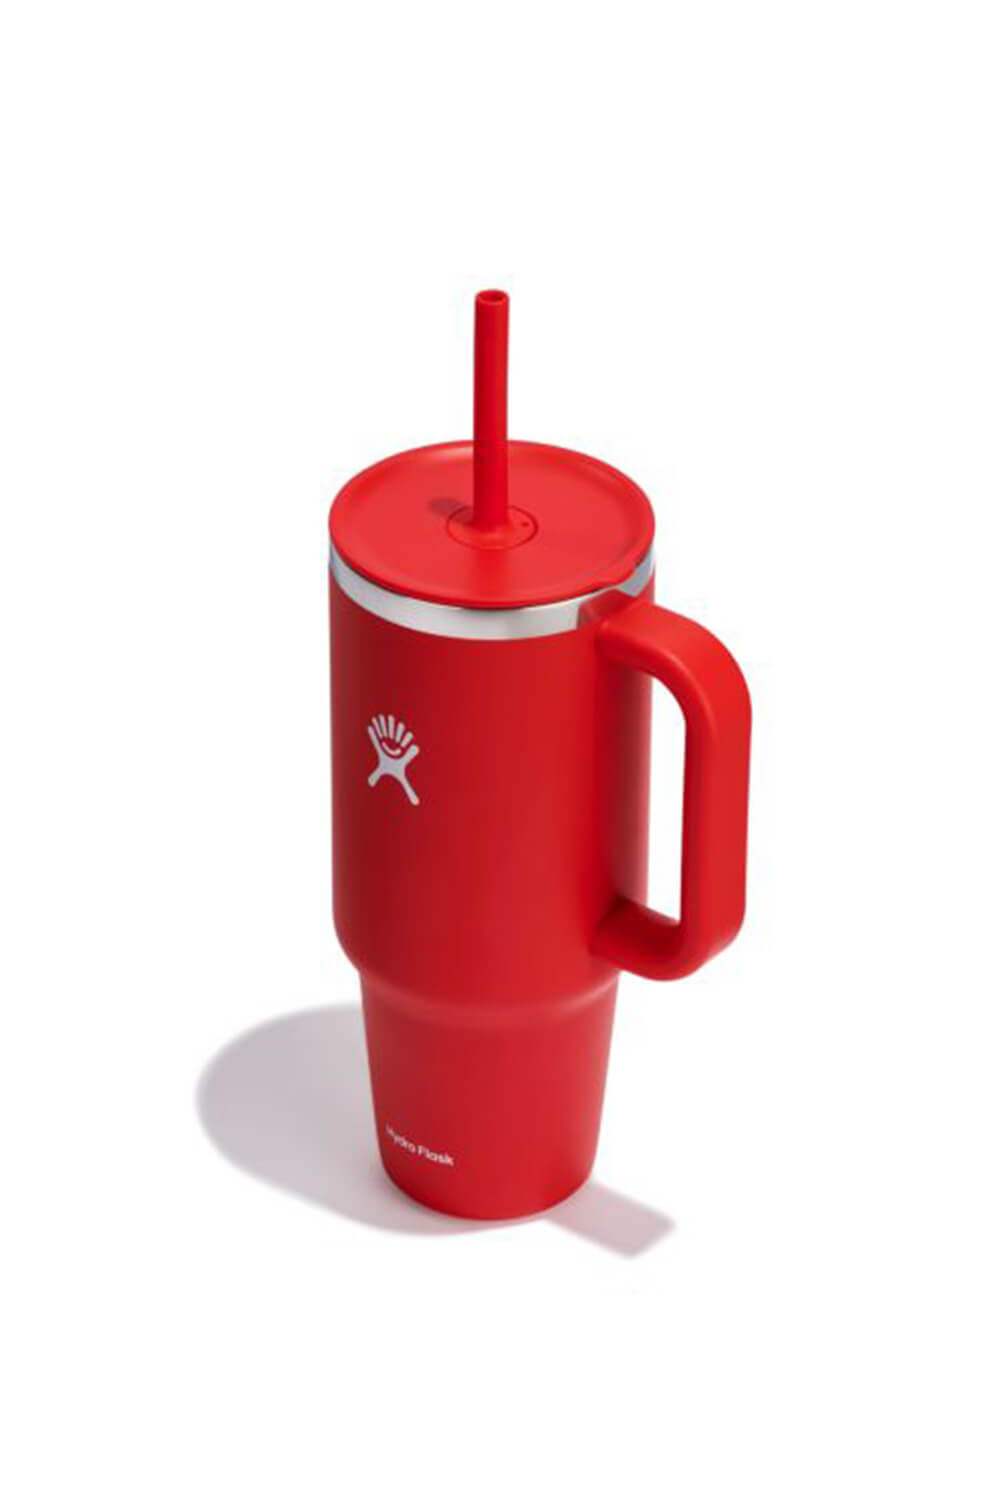 Big T - 40oz Red Thermos